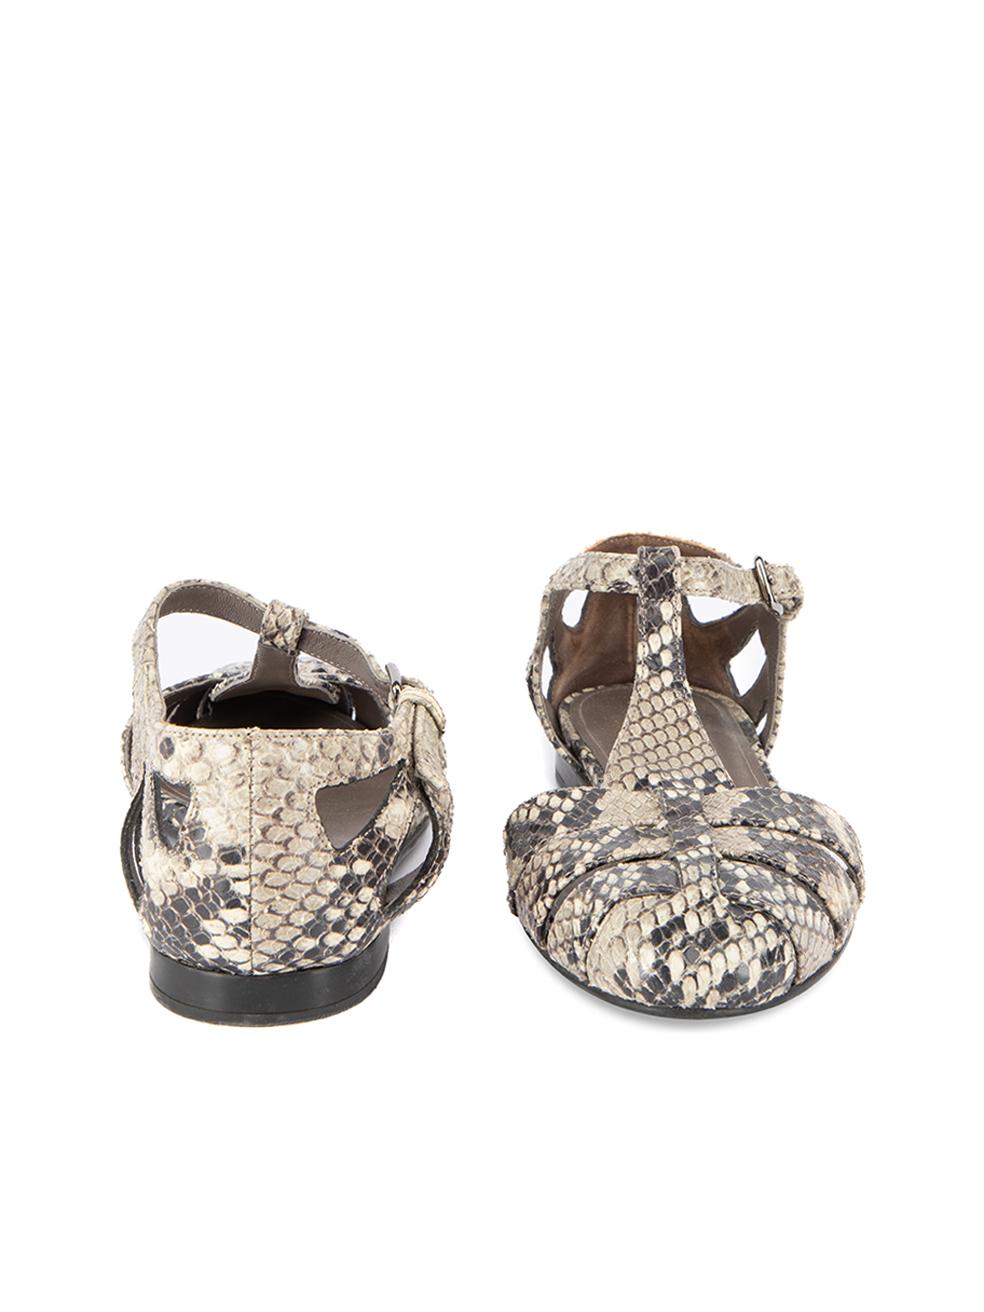 Pre-Loved Church's Women's Grey Snakeskin Flat Sandals In Excellent Condition In London, GB